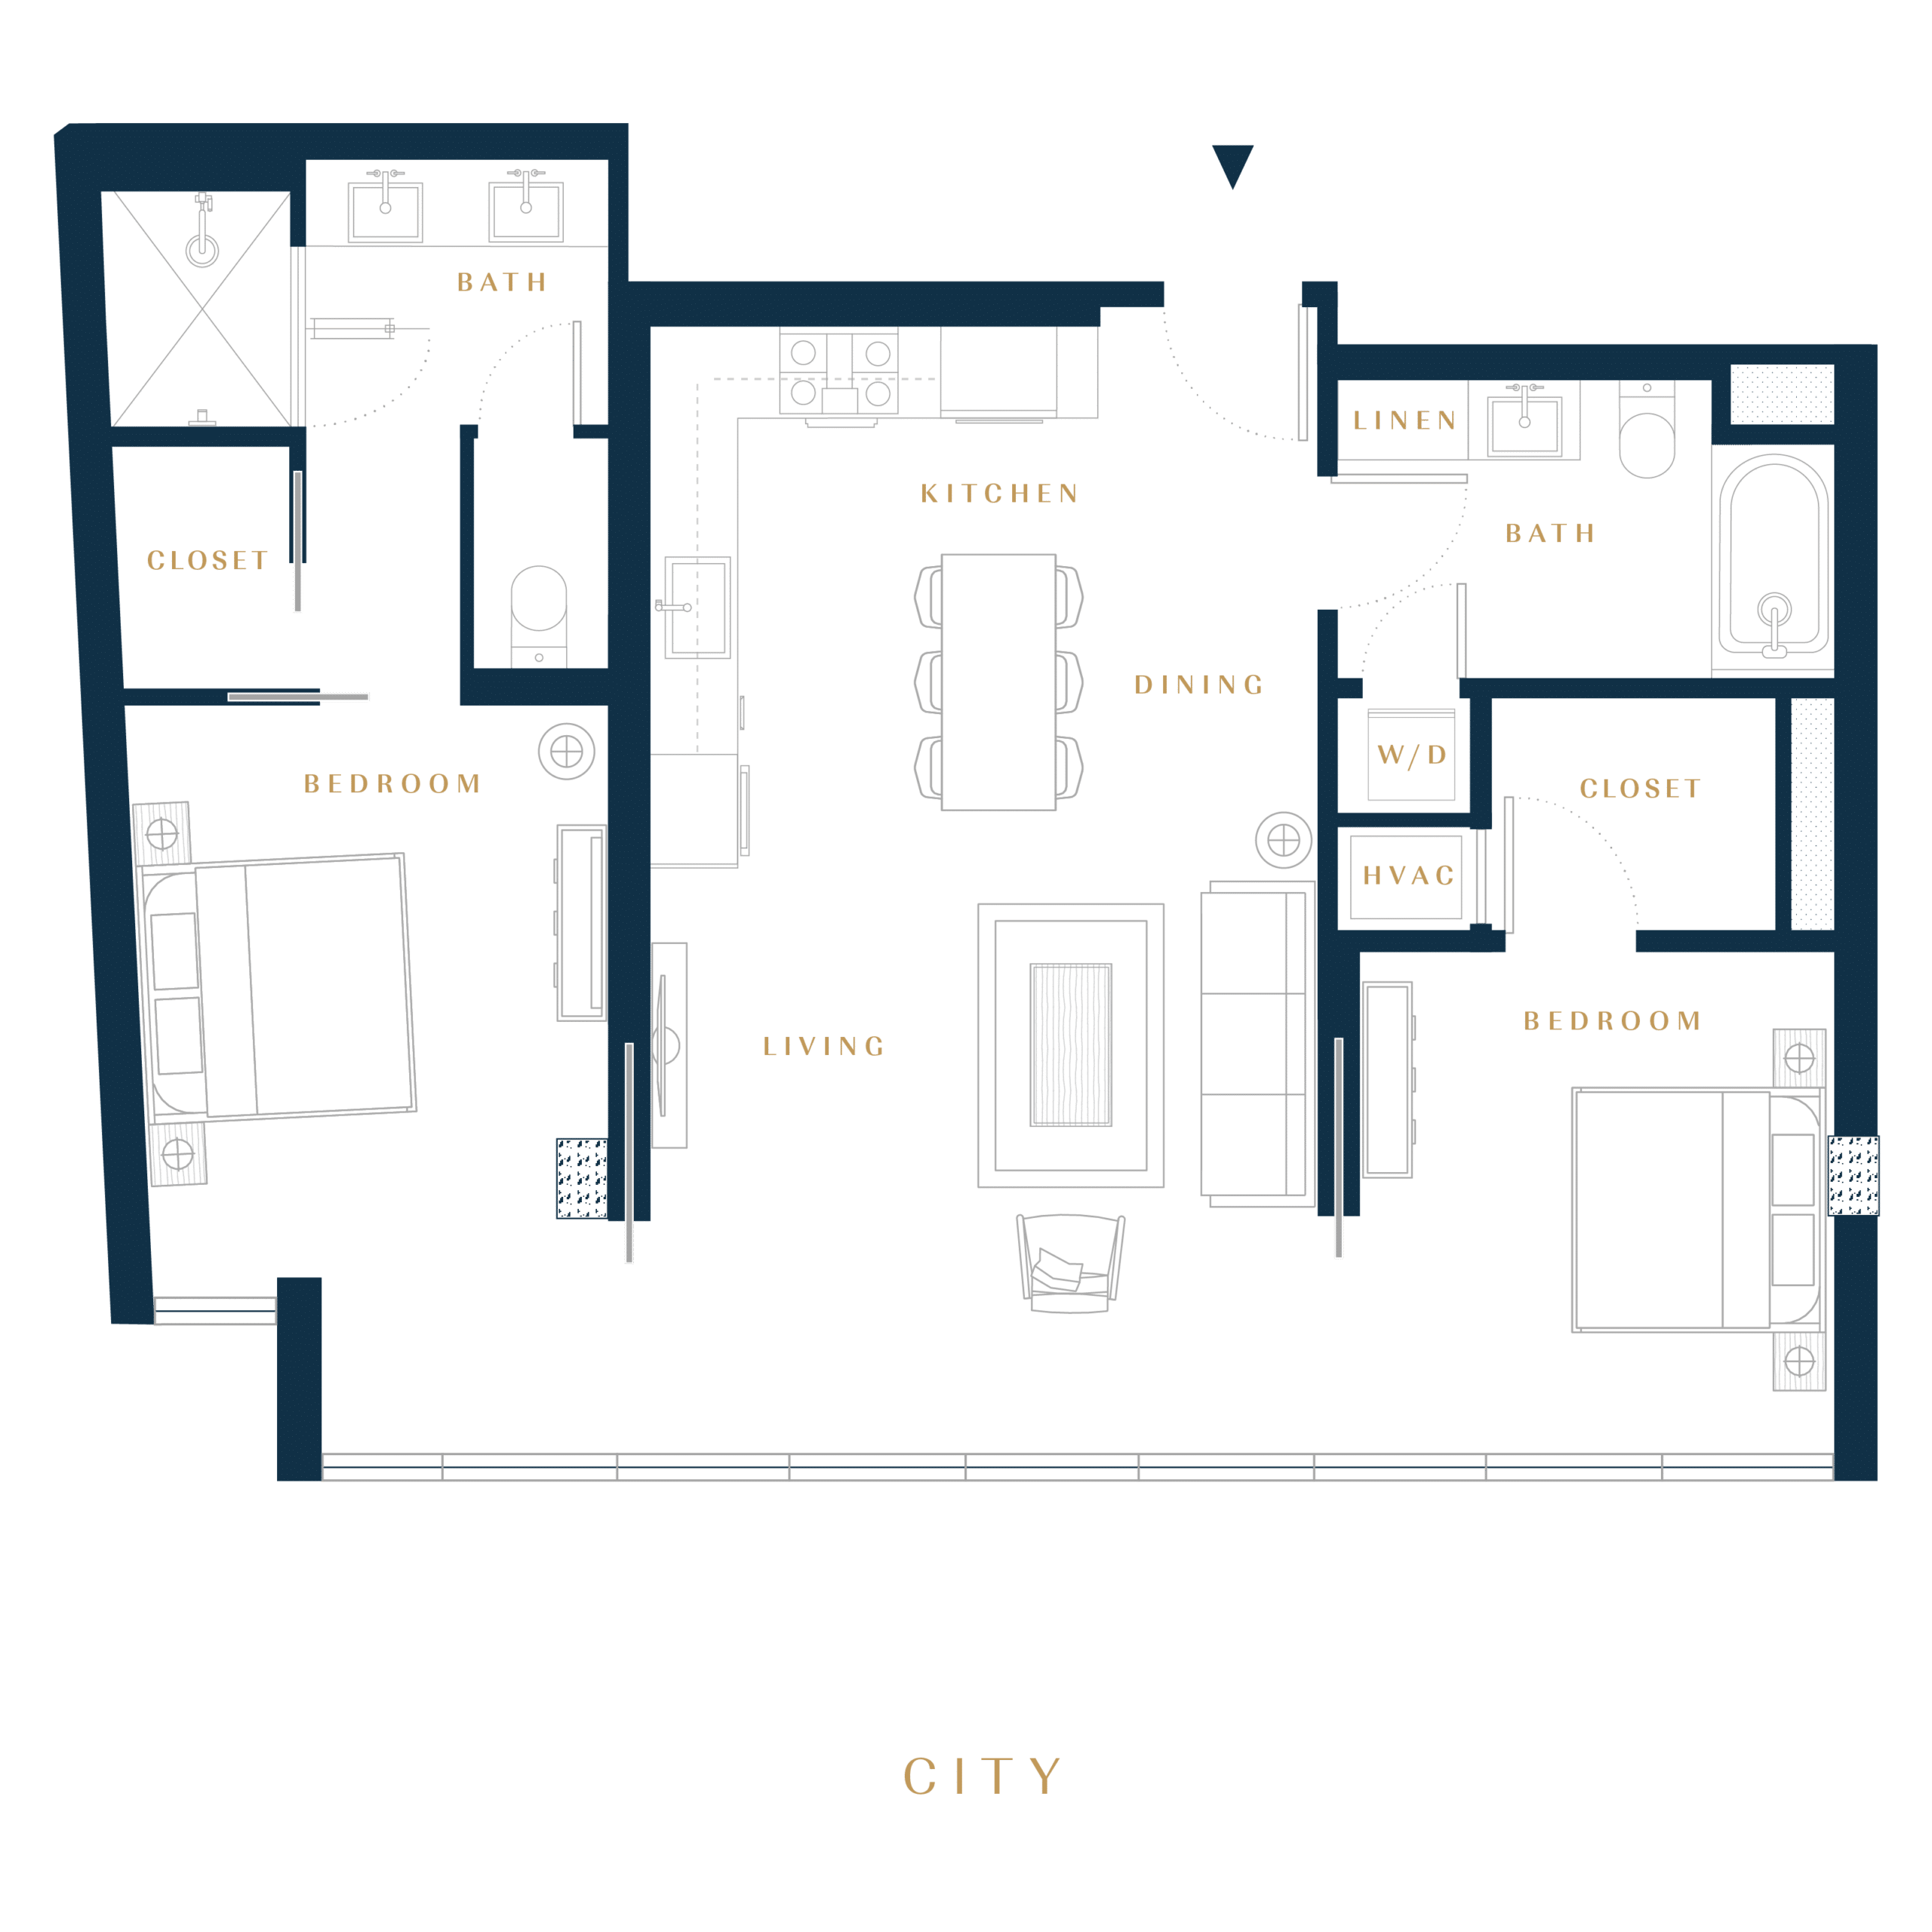 Residence 2E luxury condo floor plan in San Francisco Dogpatch